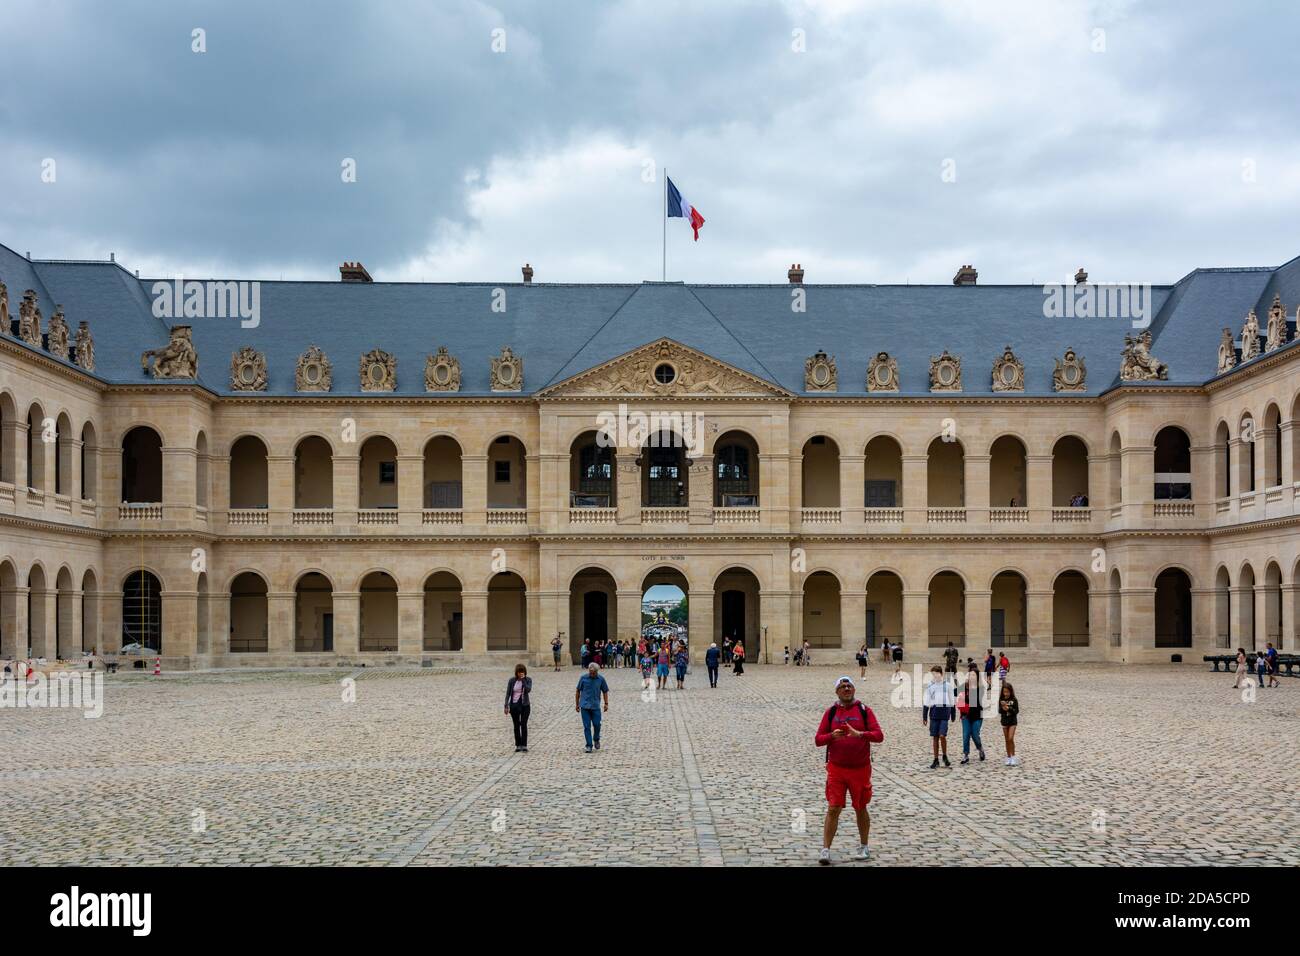 Paris, France - August 29, 2019 : Court of honor in Palace Les Invalides, or National Residence of the Invalids courtyard. Complex of museums and monu Stock Photo